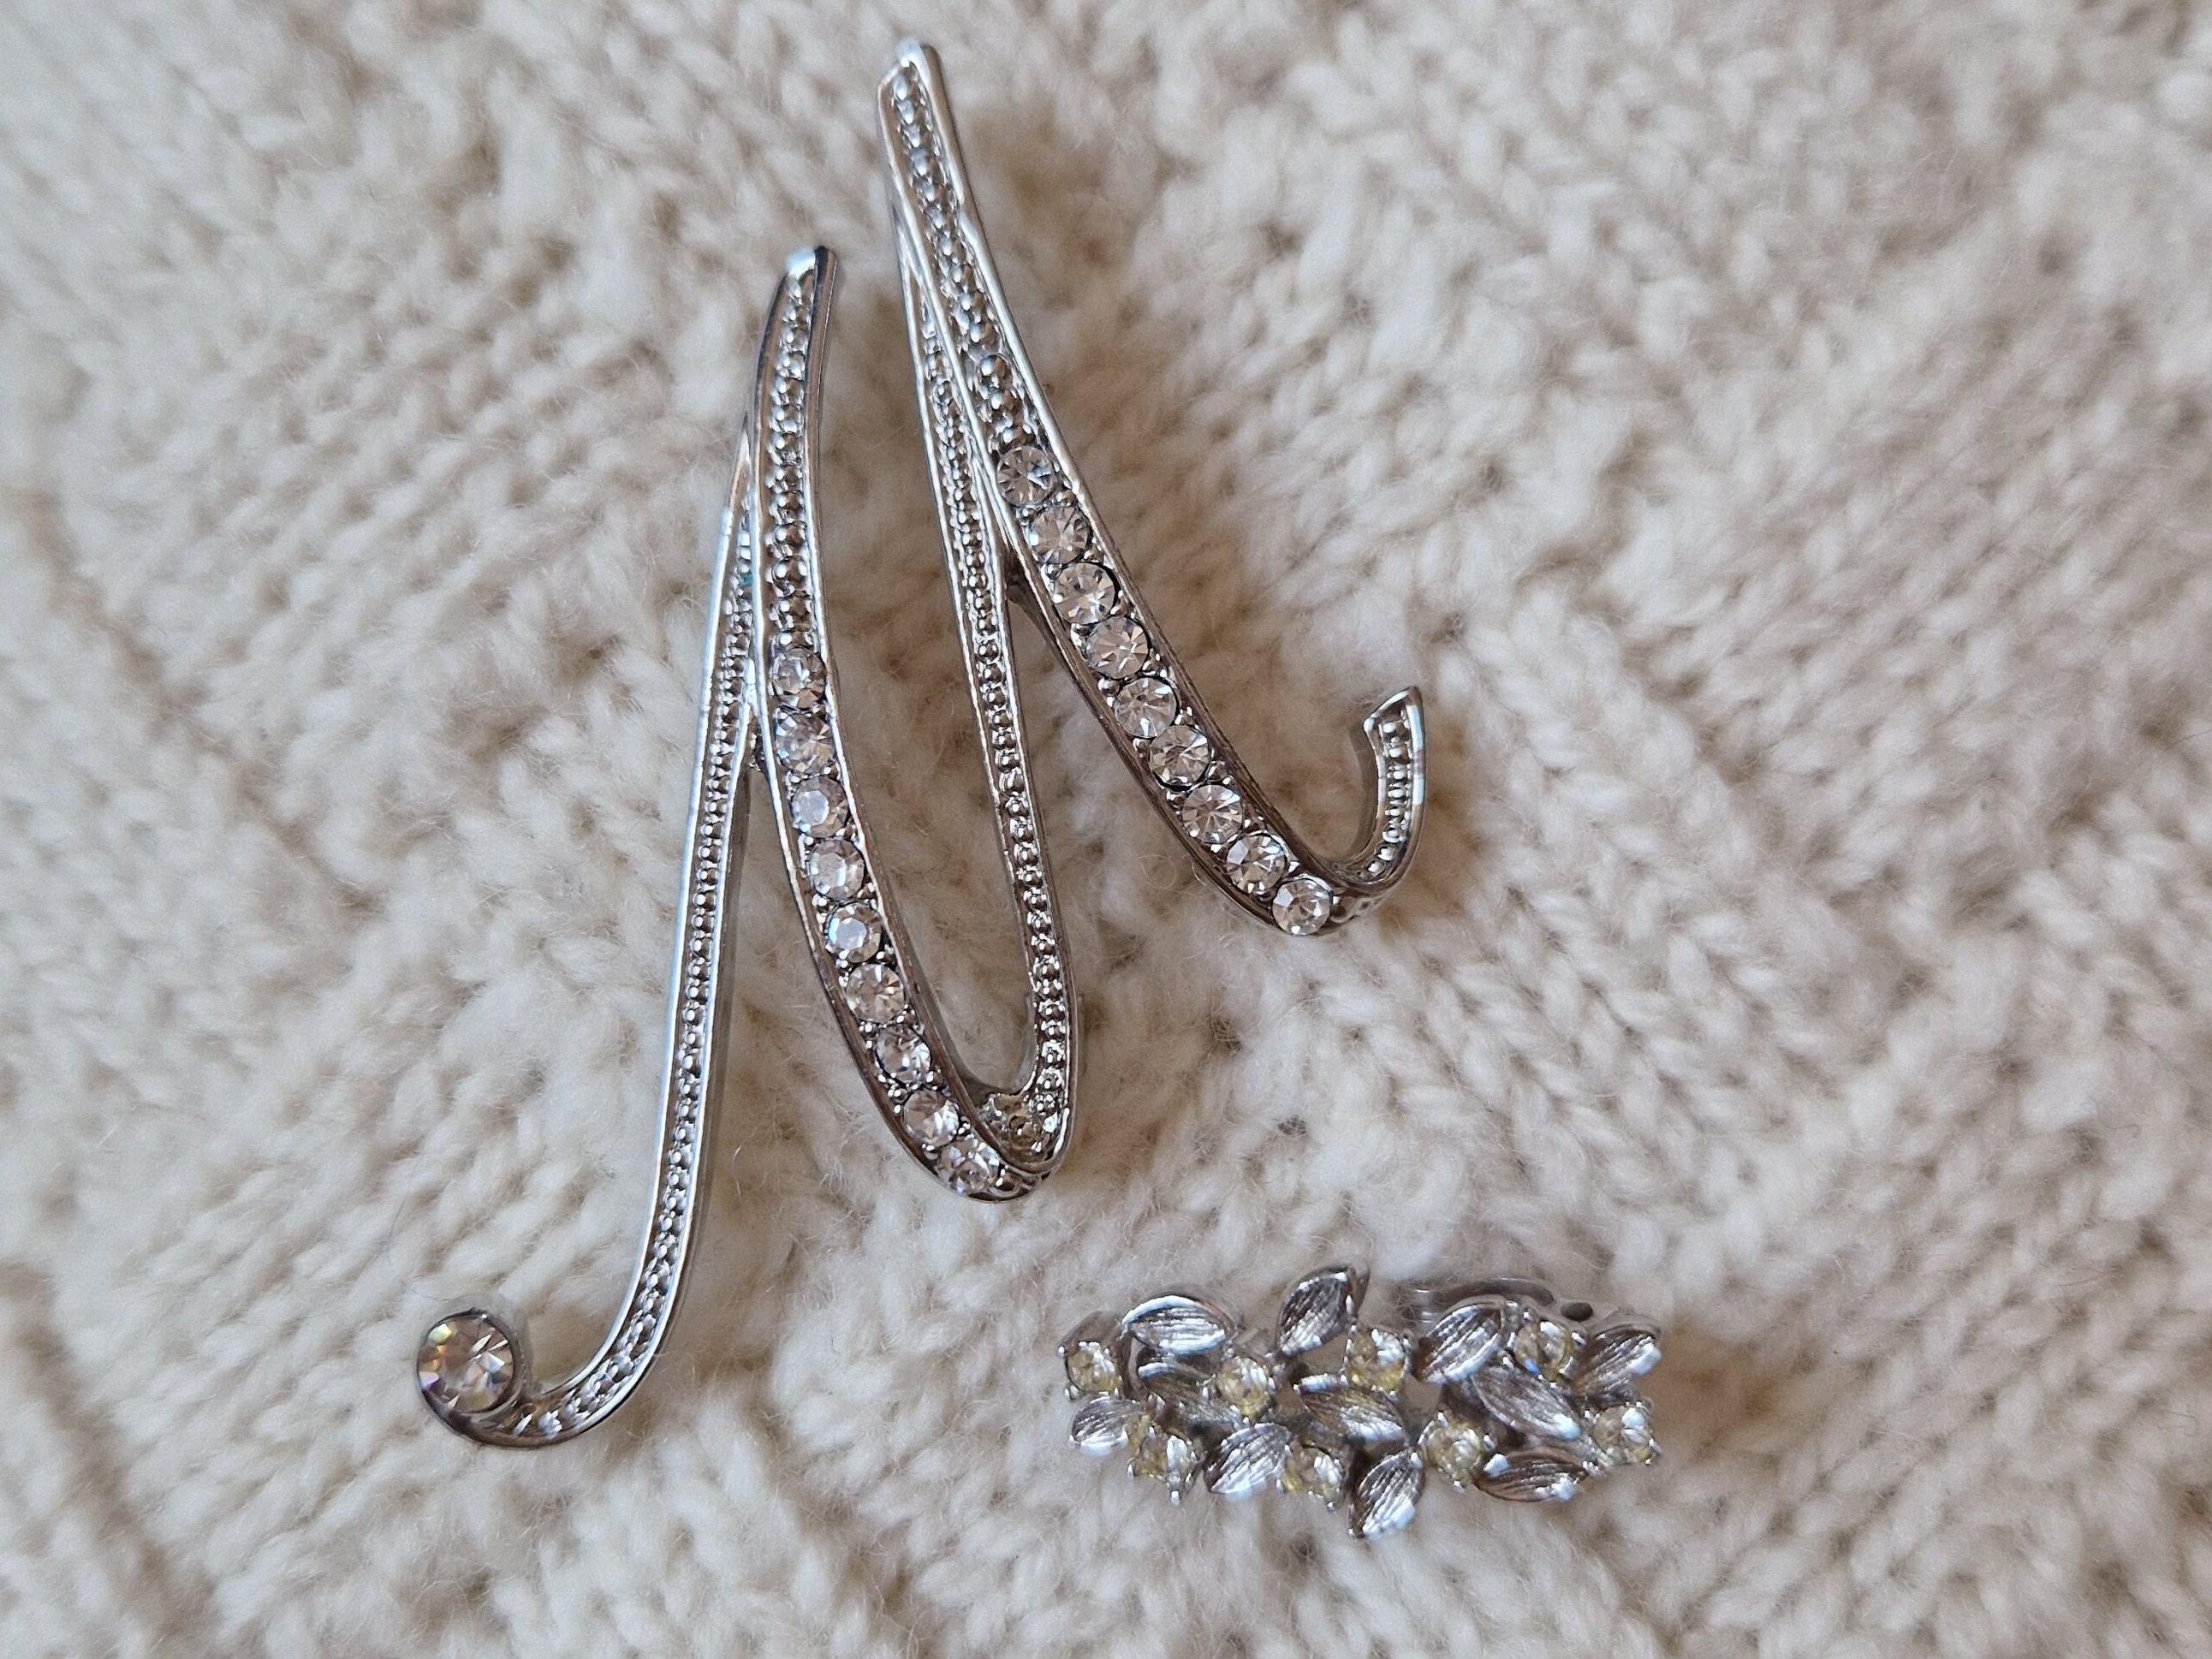 tbymallano Vintage M Letter Brooch Pin with Clear Crystals, Silver Tone Crystal Brooches, Romantic Duo Brooch Set